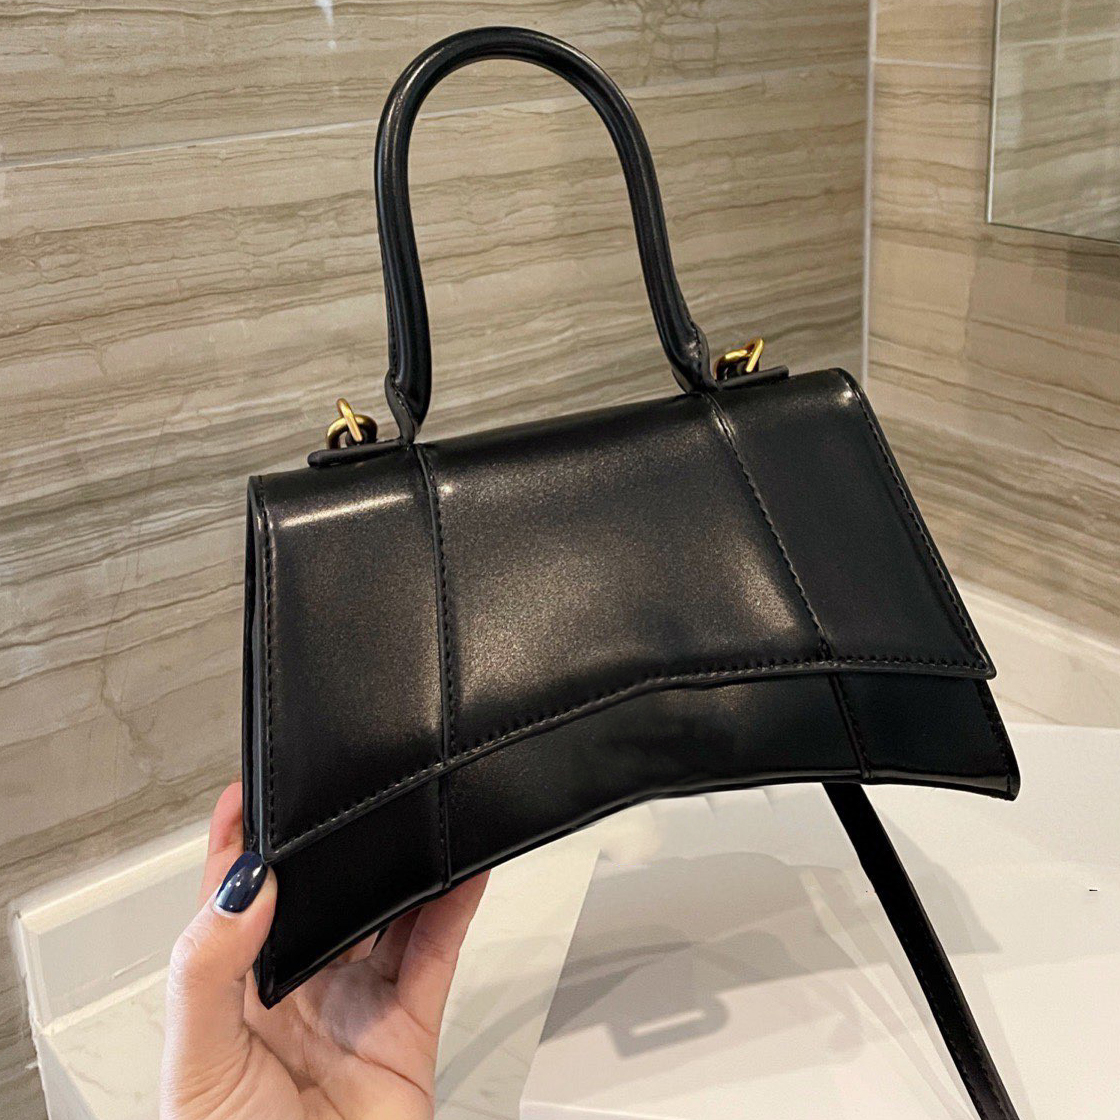 

hourglass bag shoulder Bags High Quality Ladies Brand 2022 Luxurys Top designers letter mother handbag Fashion handbags totes cossbody wallet Leather purse Thread, No bags